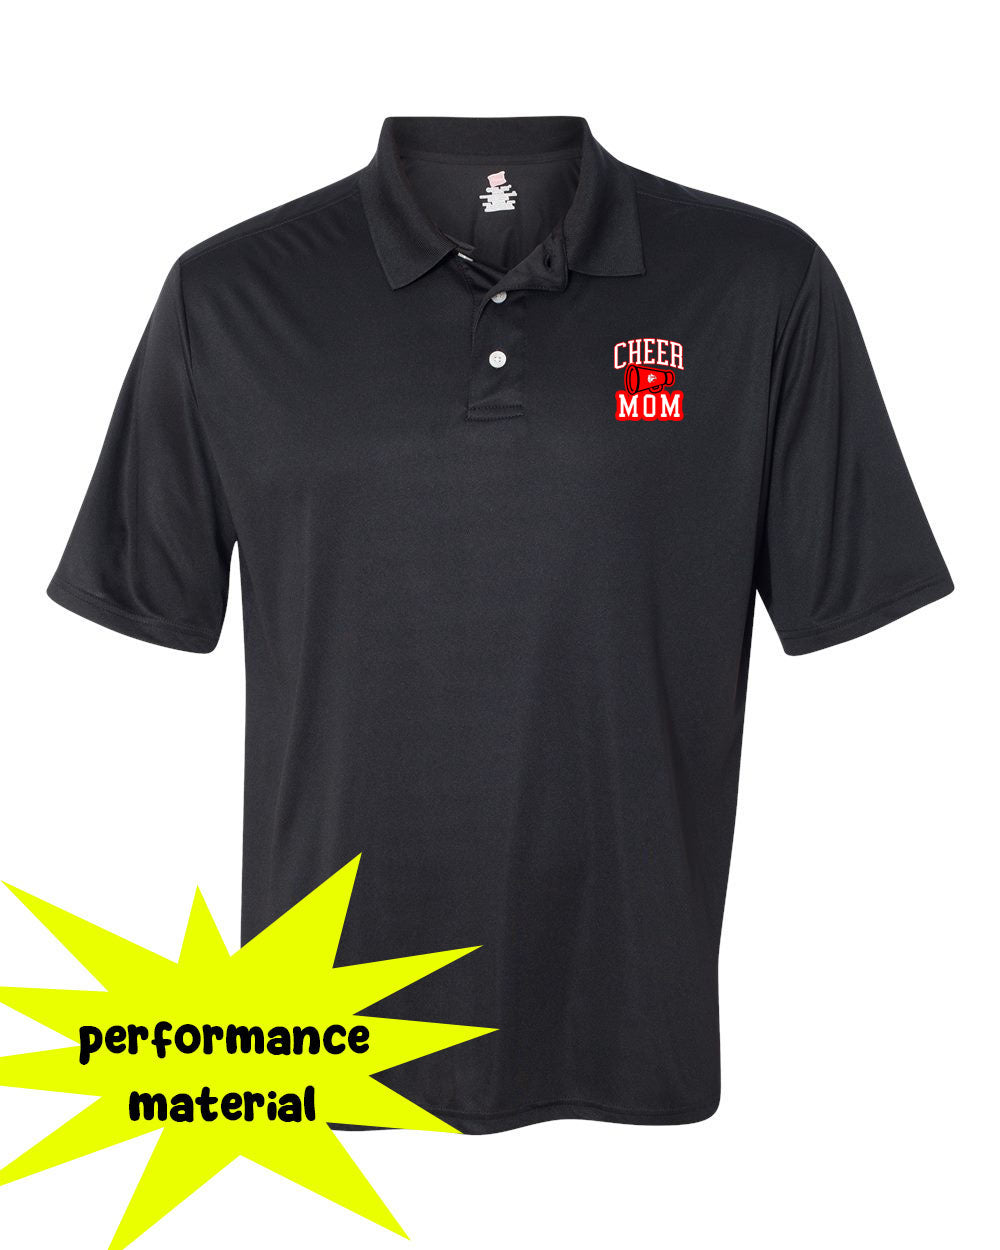 High Point Cheer Design 7 Performance Material Polo T-Shirt